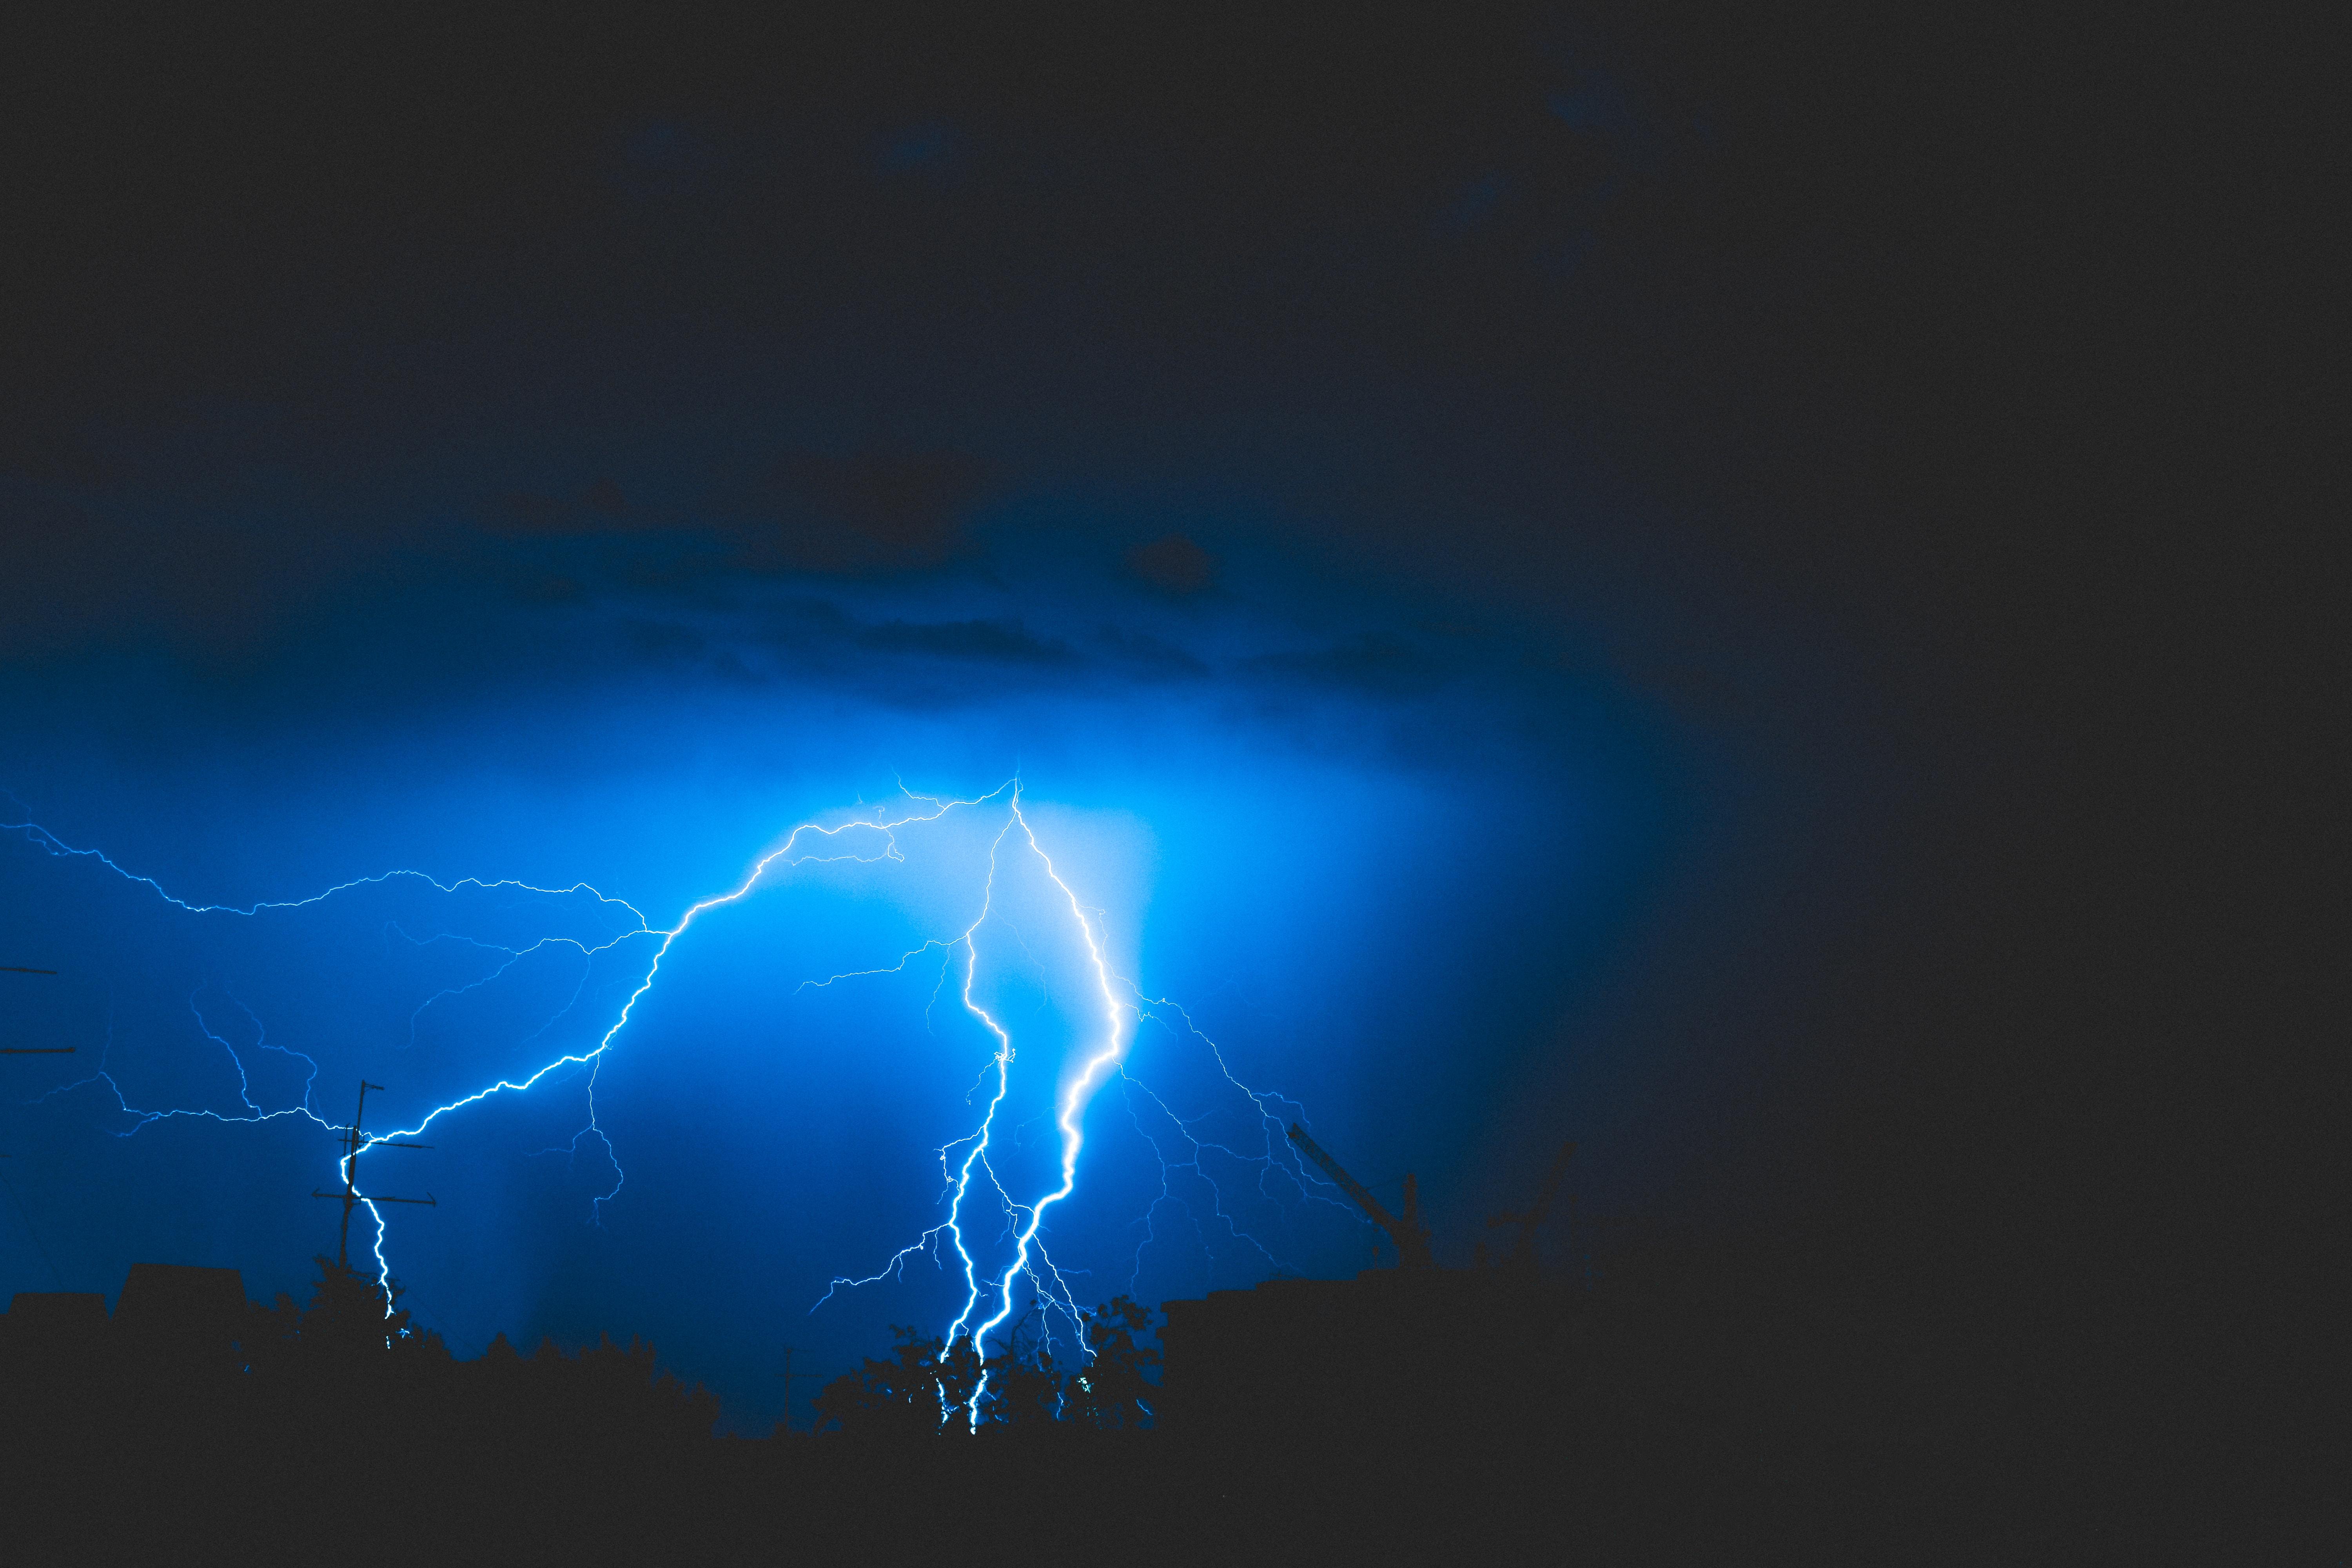 Thunderstorm Picture [HD]. Download Free Image